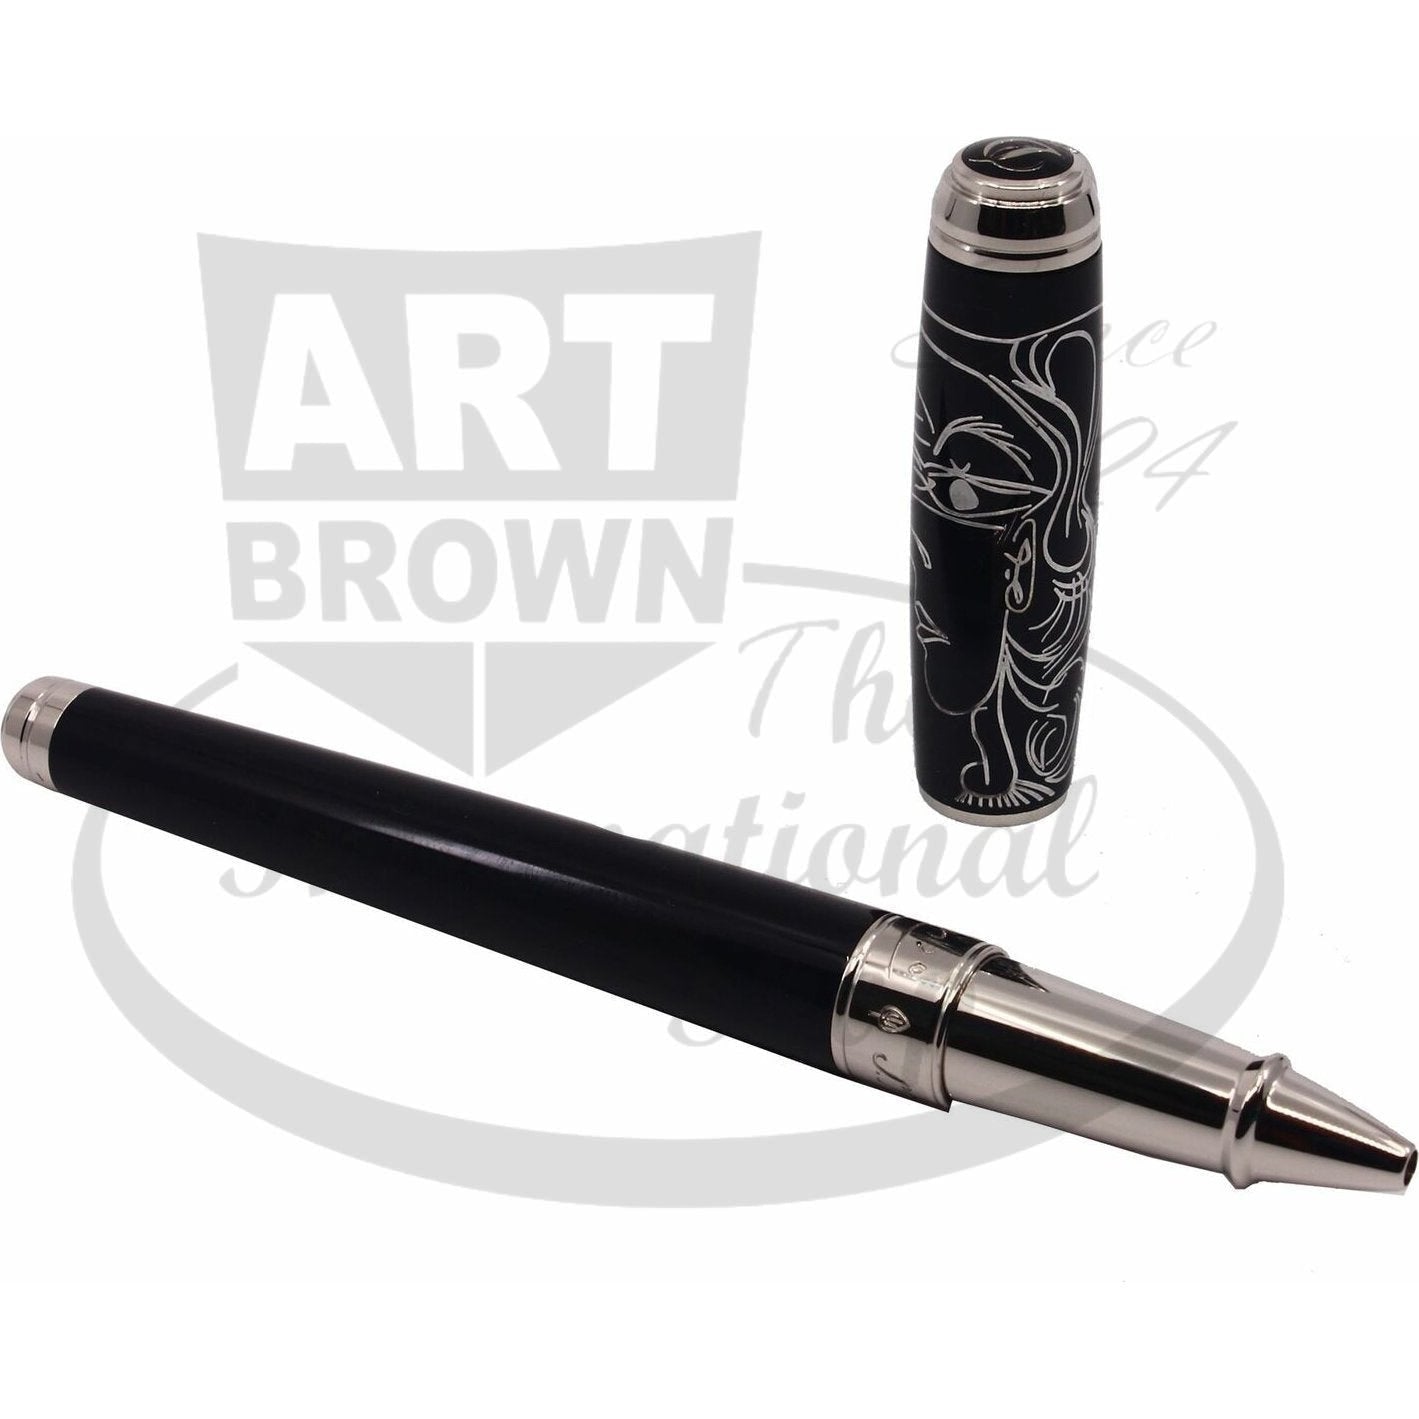 S.T. Dupont Limited Edition Line D Picasso Black Palladium Rollerball Pen, 412046